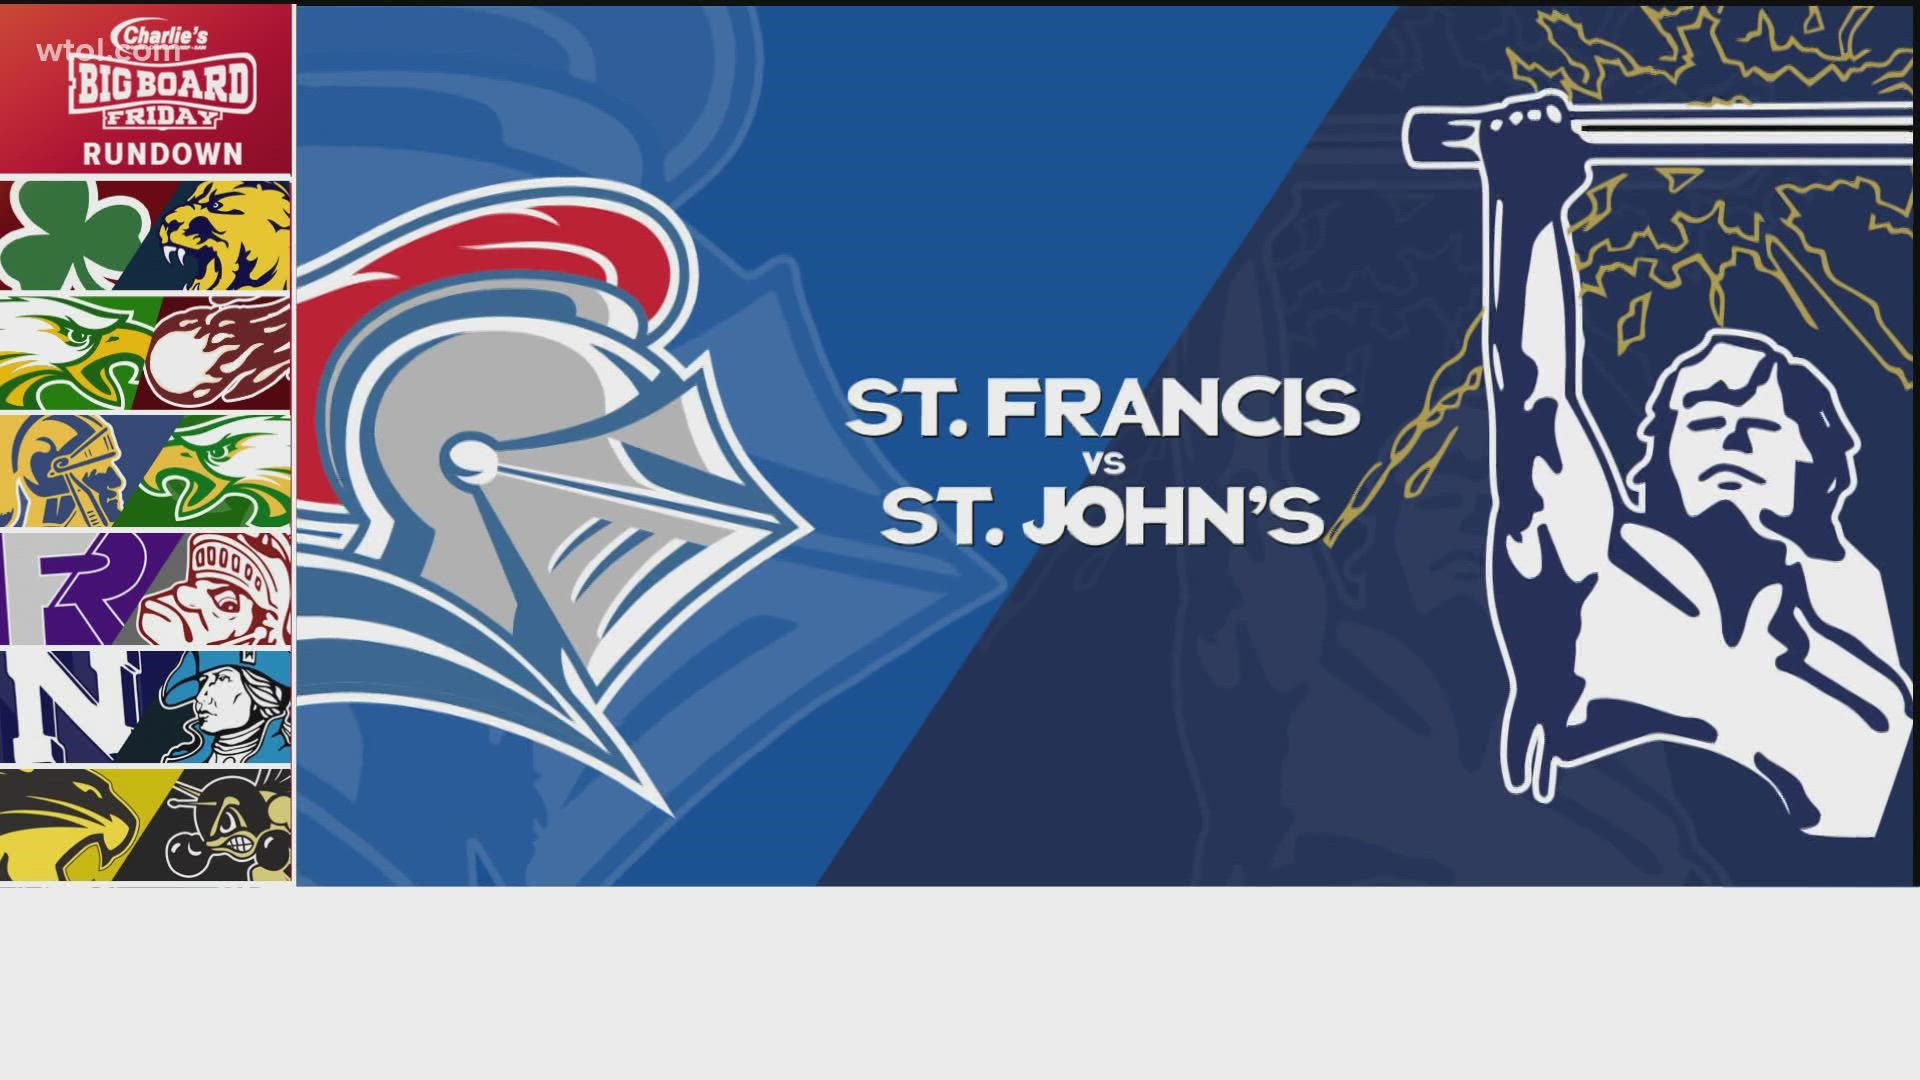 Great rivalry matchup here. St. John's and St. Francis from the Glass Bowl. The Titans have won this game 7 straight seasons, taking on the Knights.